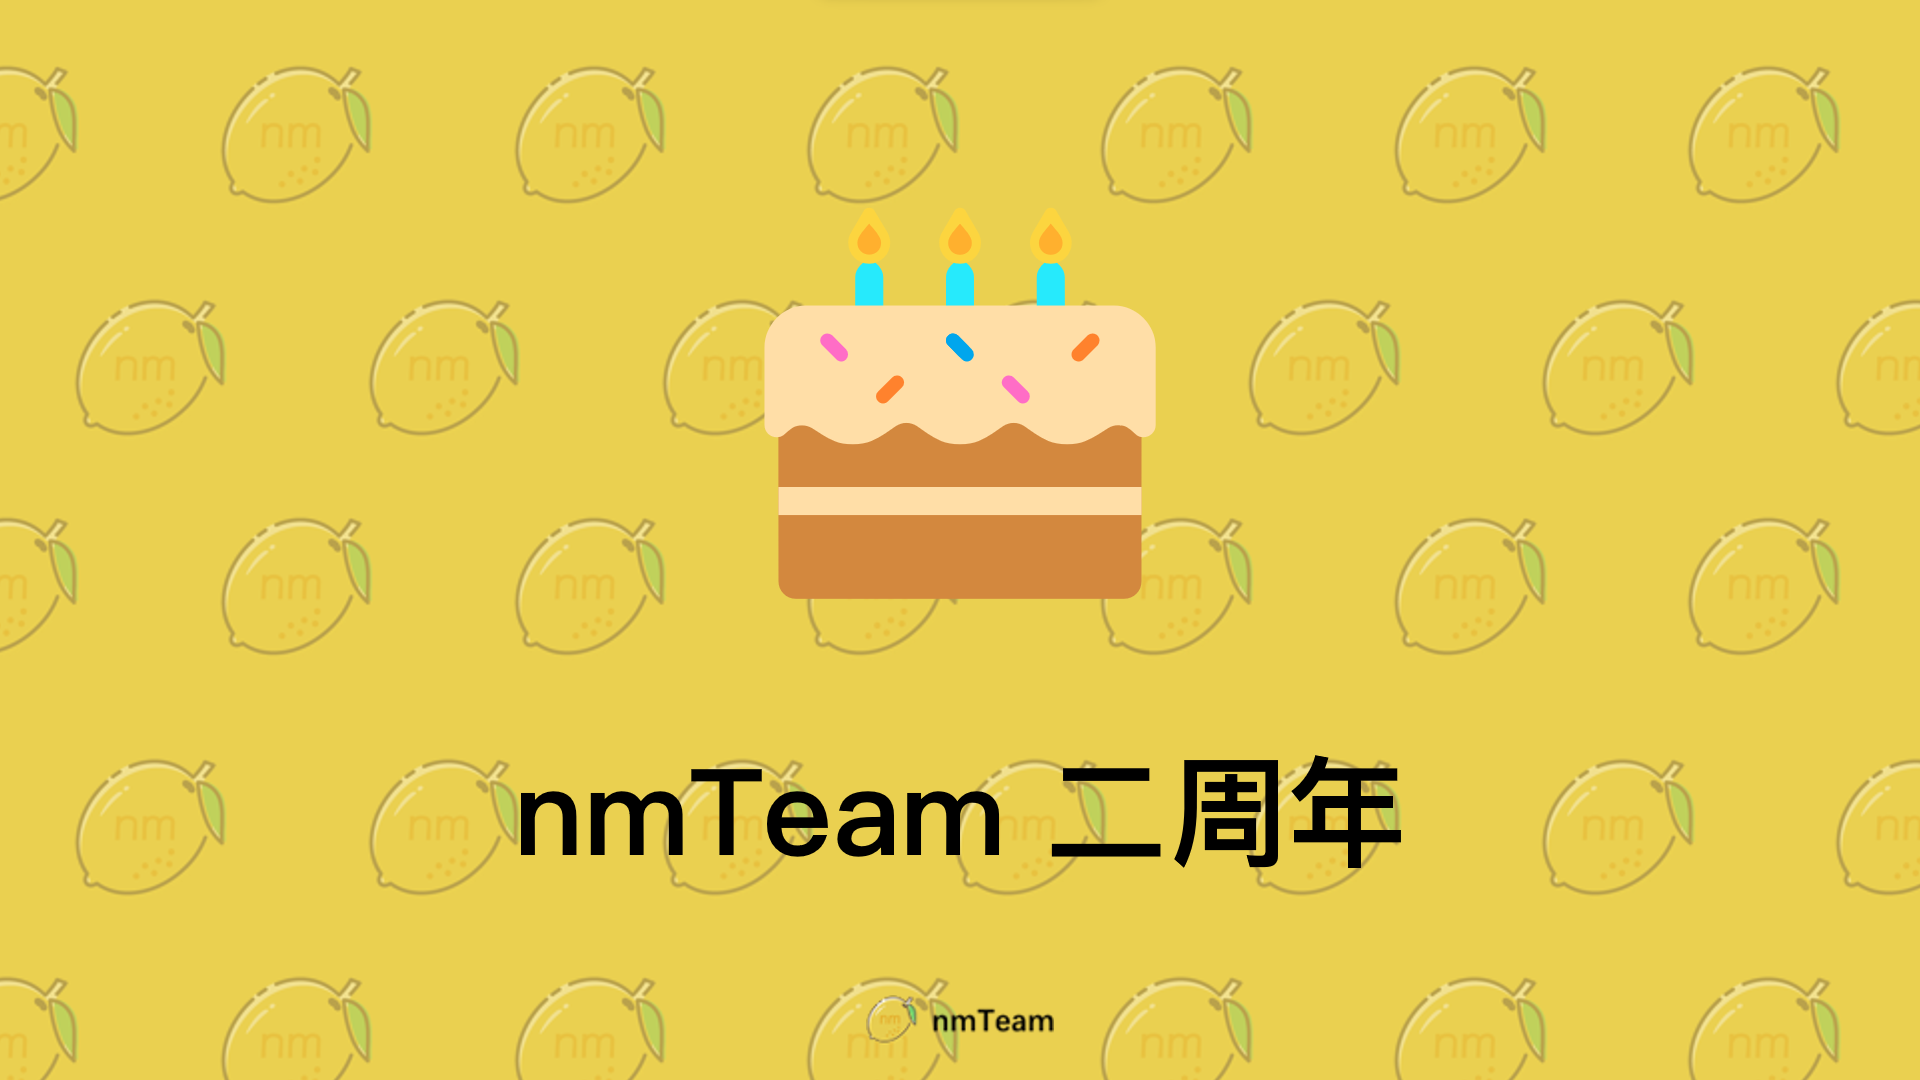 nmTeam officially celebrates its second anniversary today